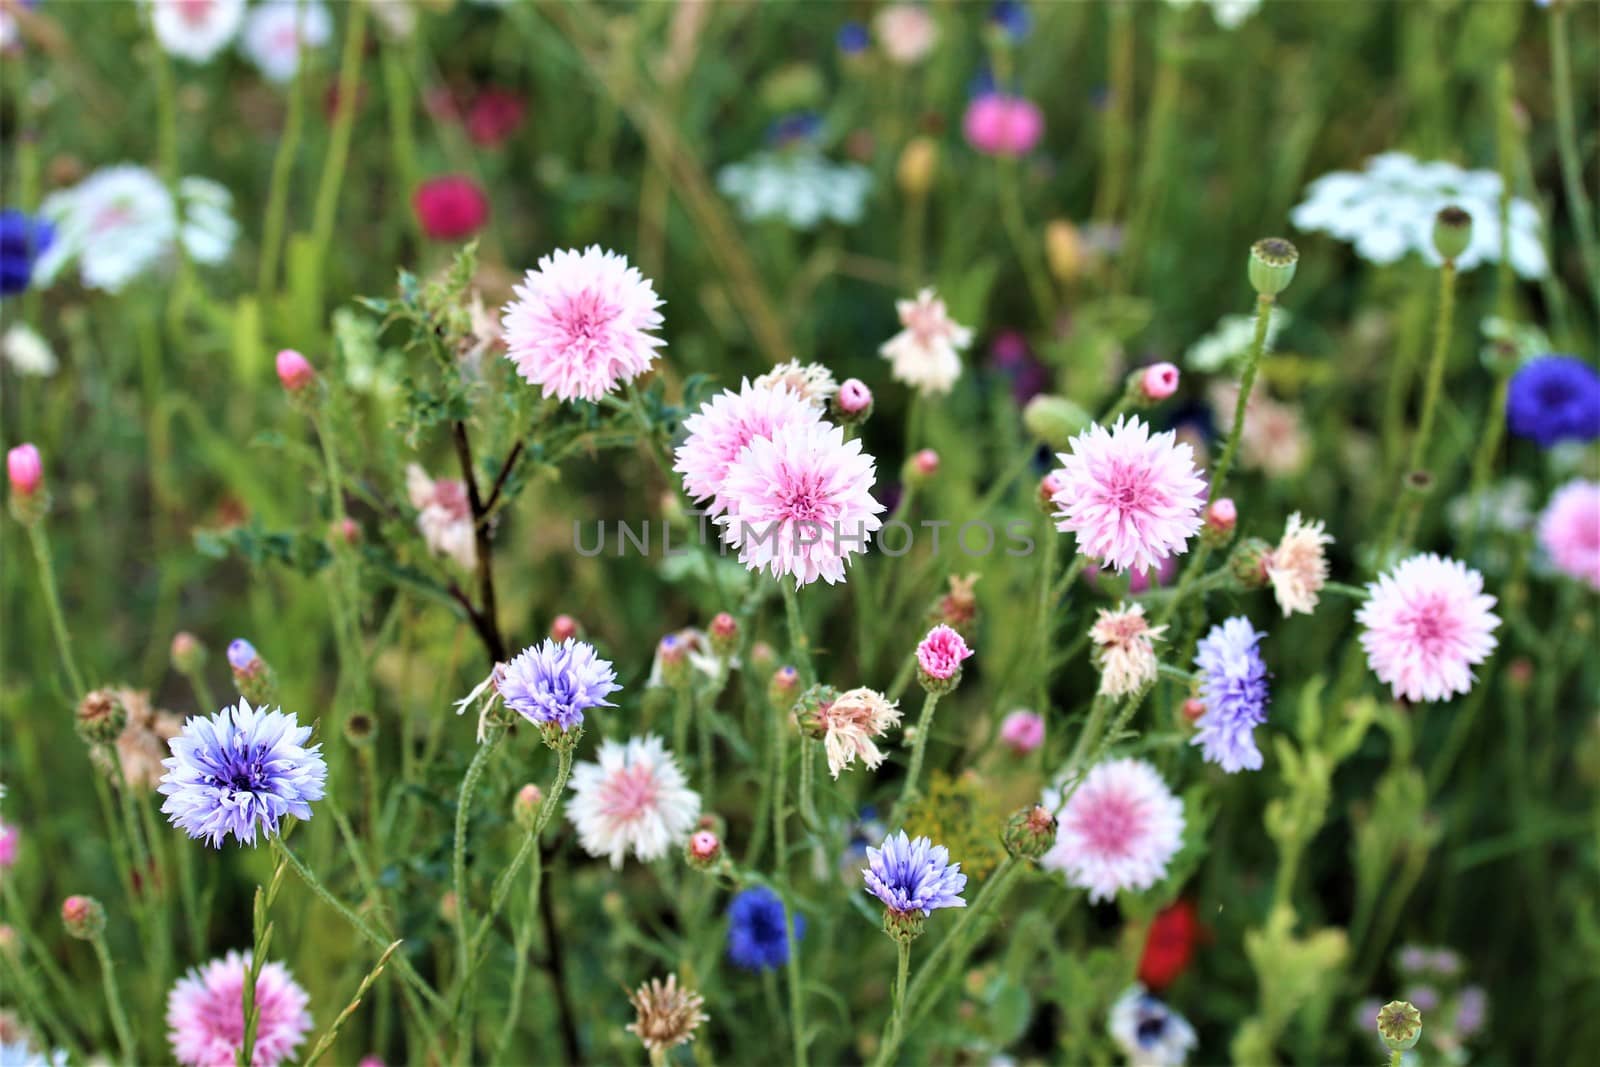 Coloured cornflowers in a flower bed